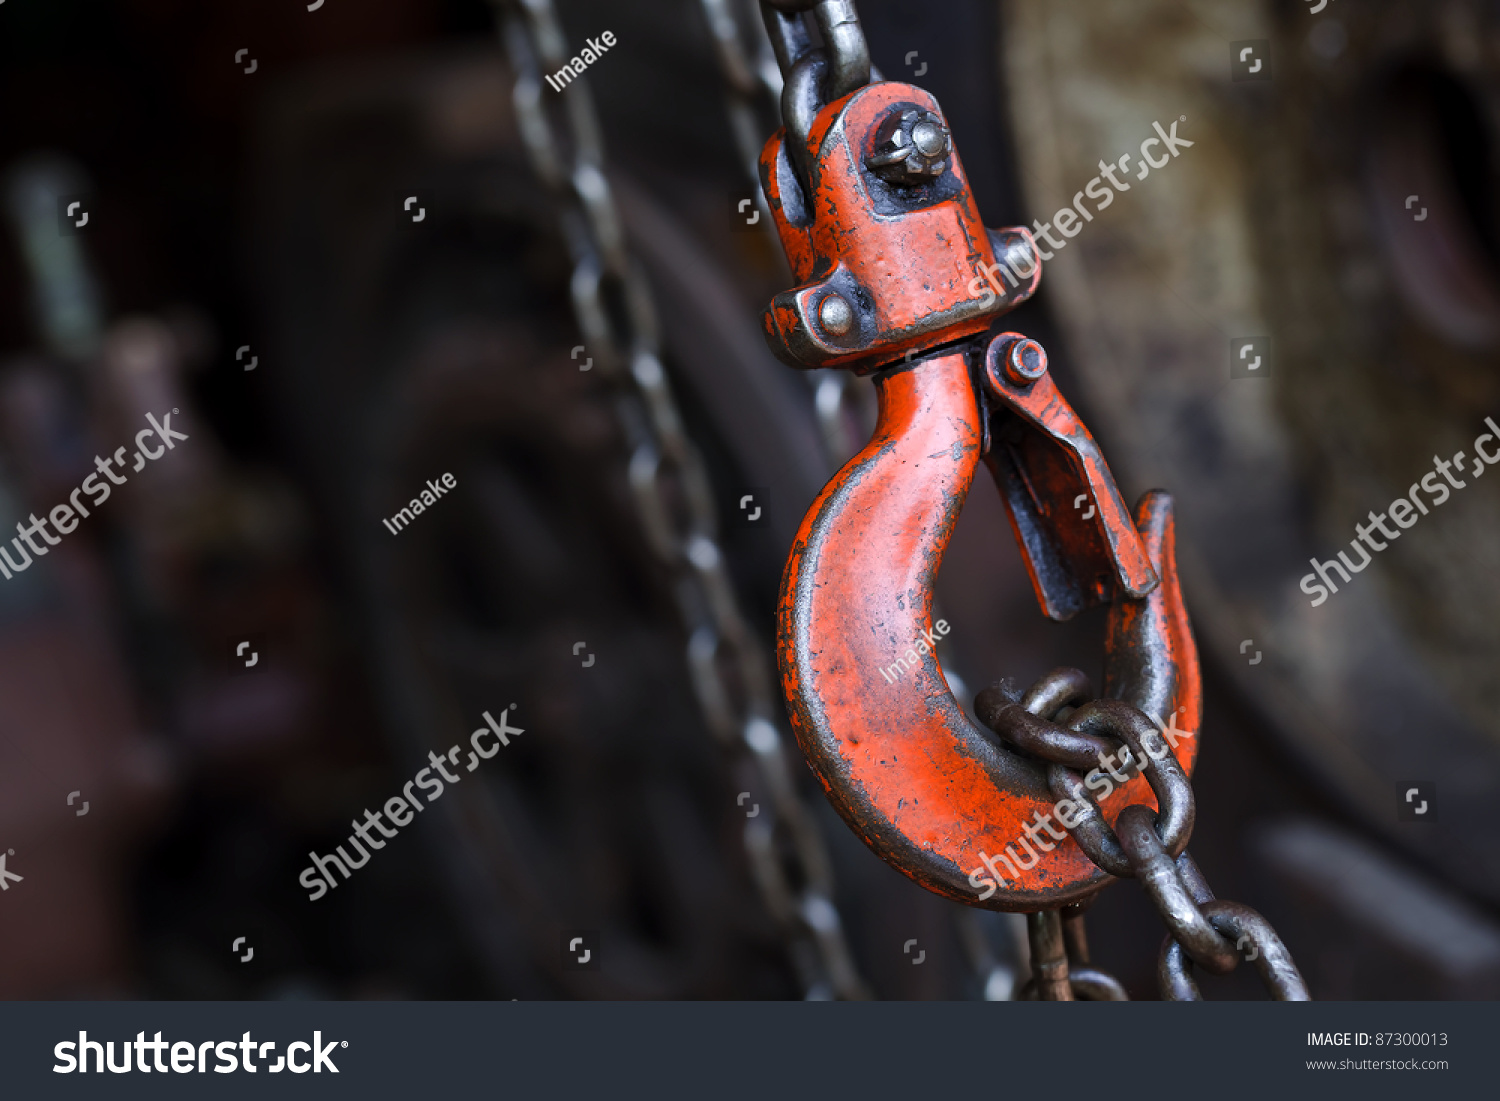 red hoist chain as vintage background #87300013